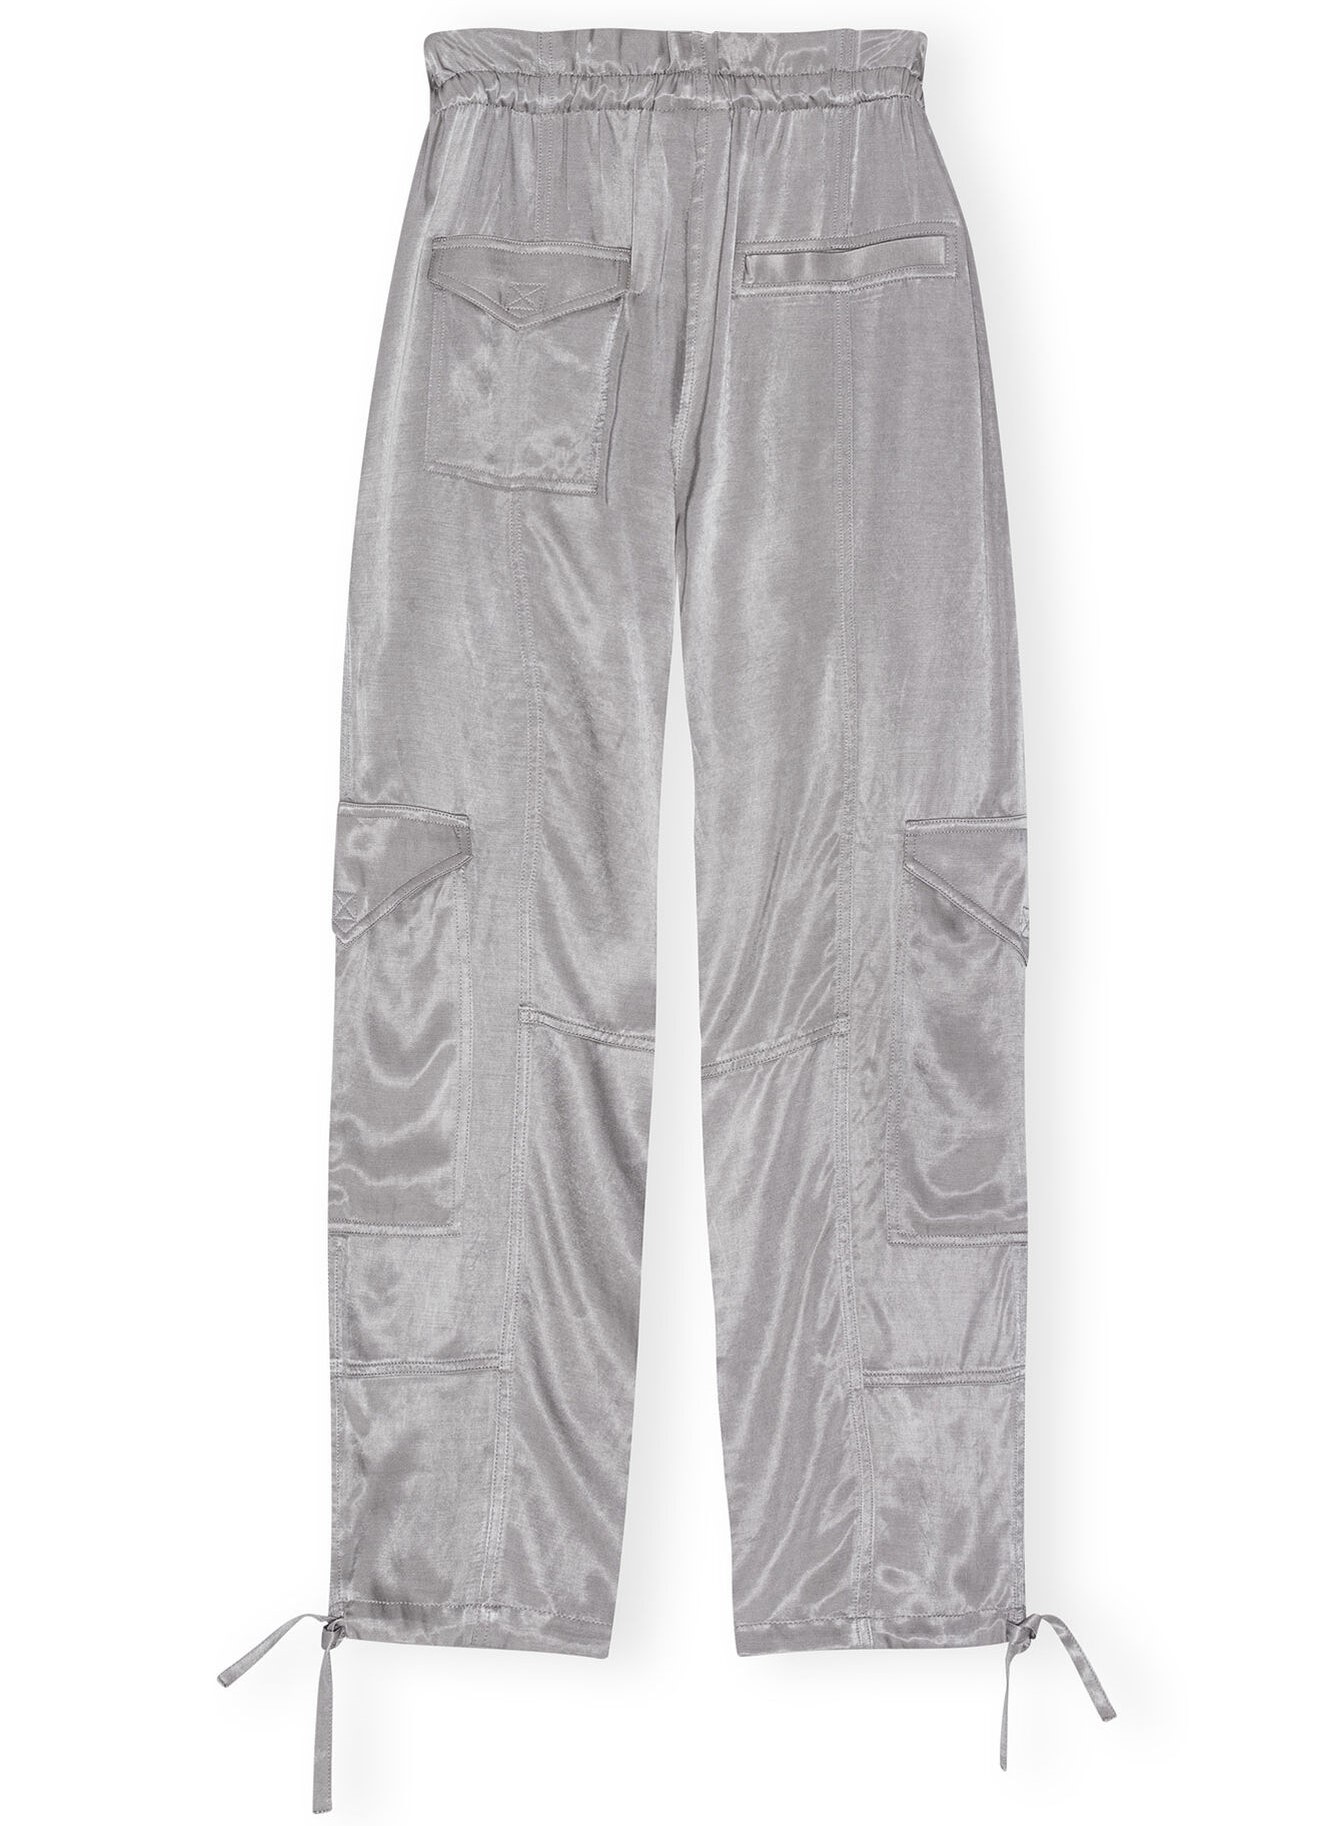 GANNI Washed Satin Pant in Frost Gray 34